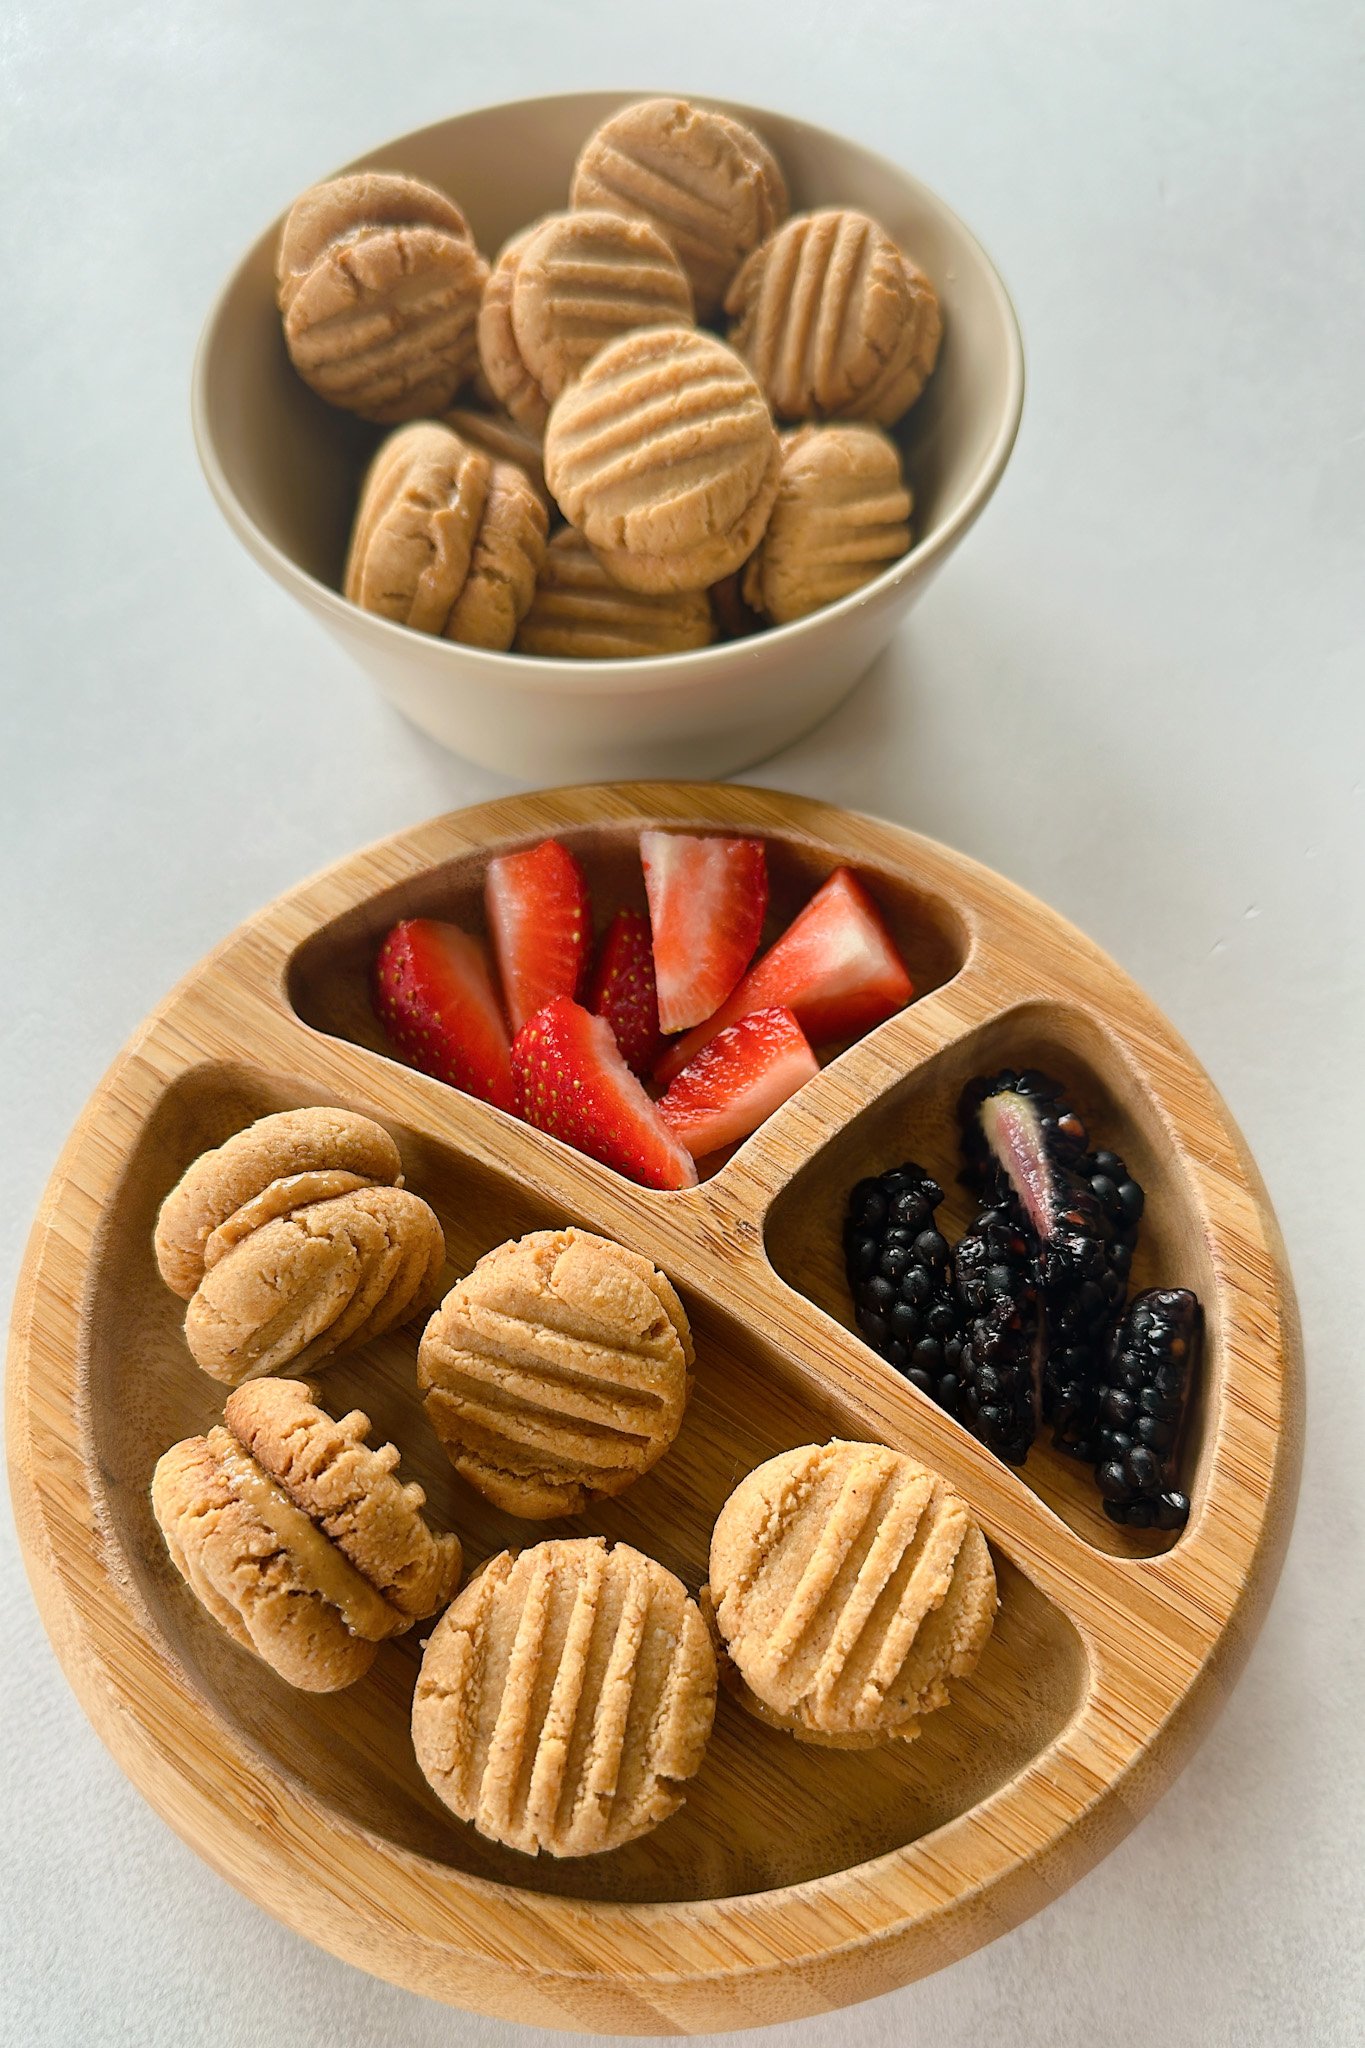 Peanut butter cookies served with blackberries and strawberries.